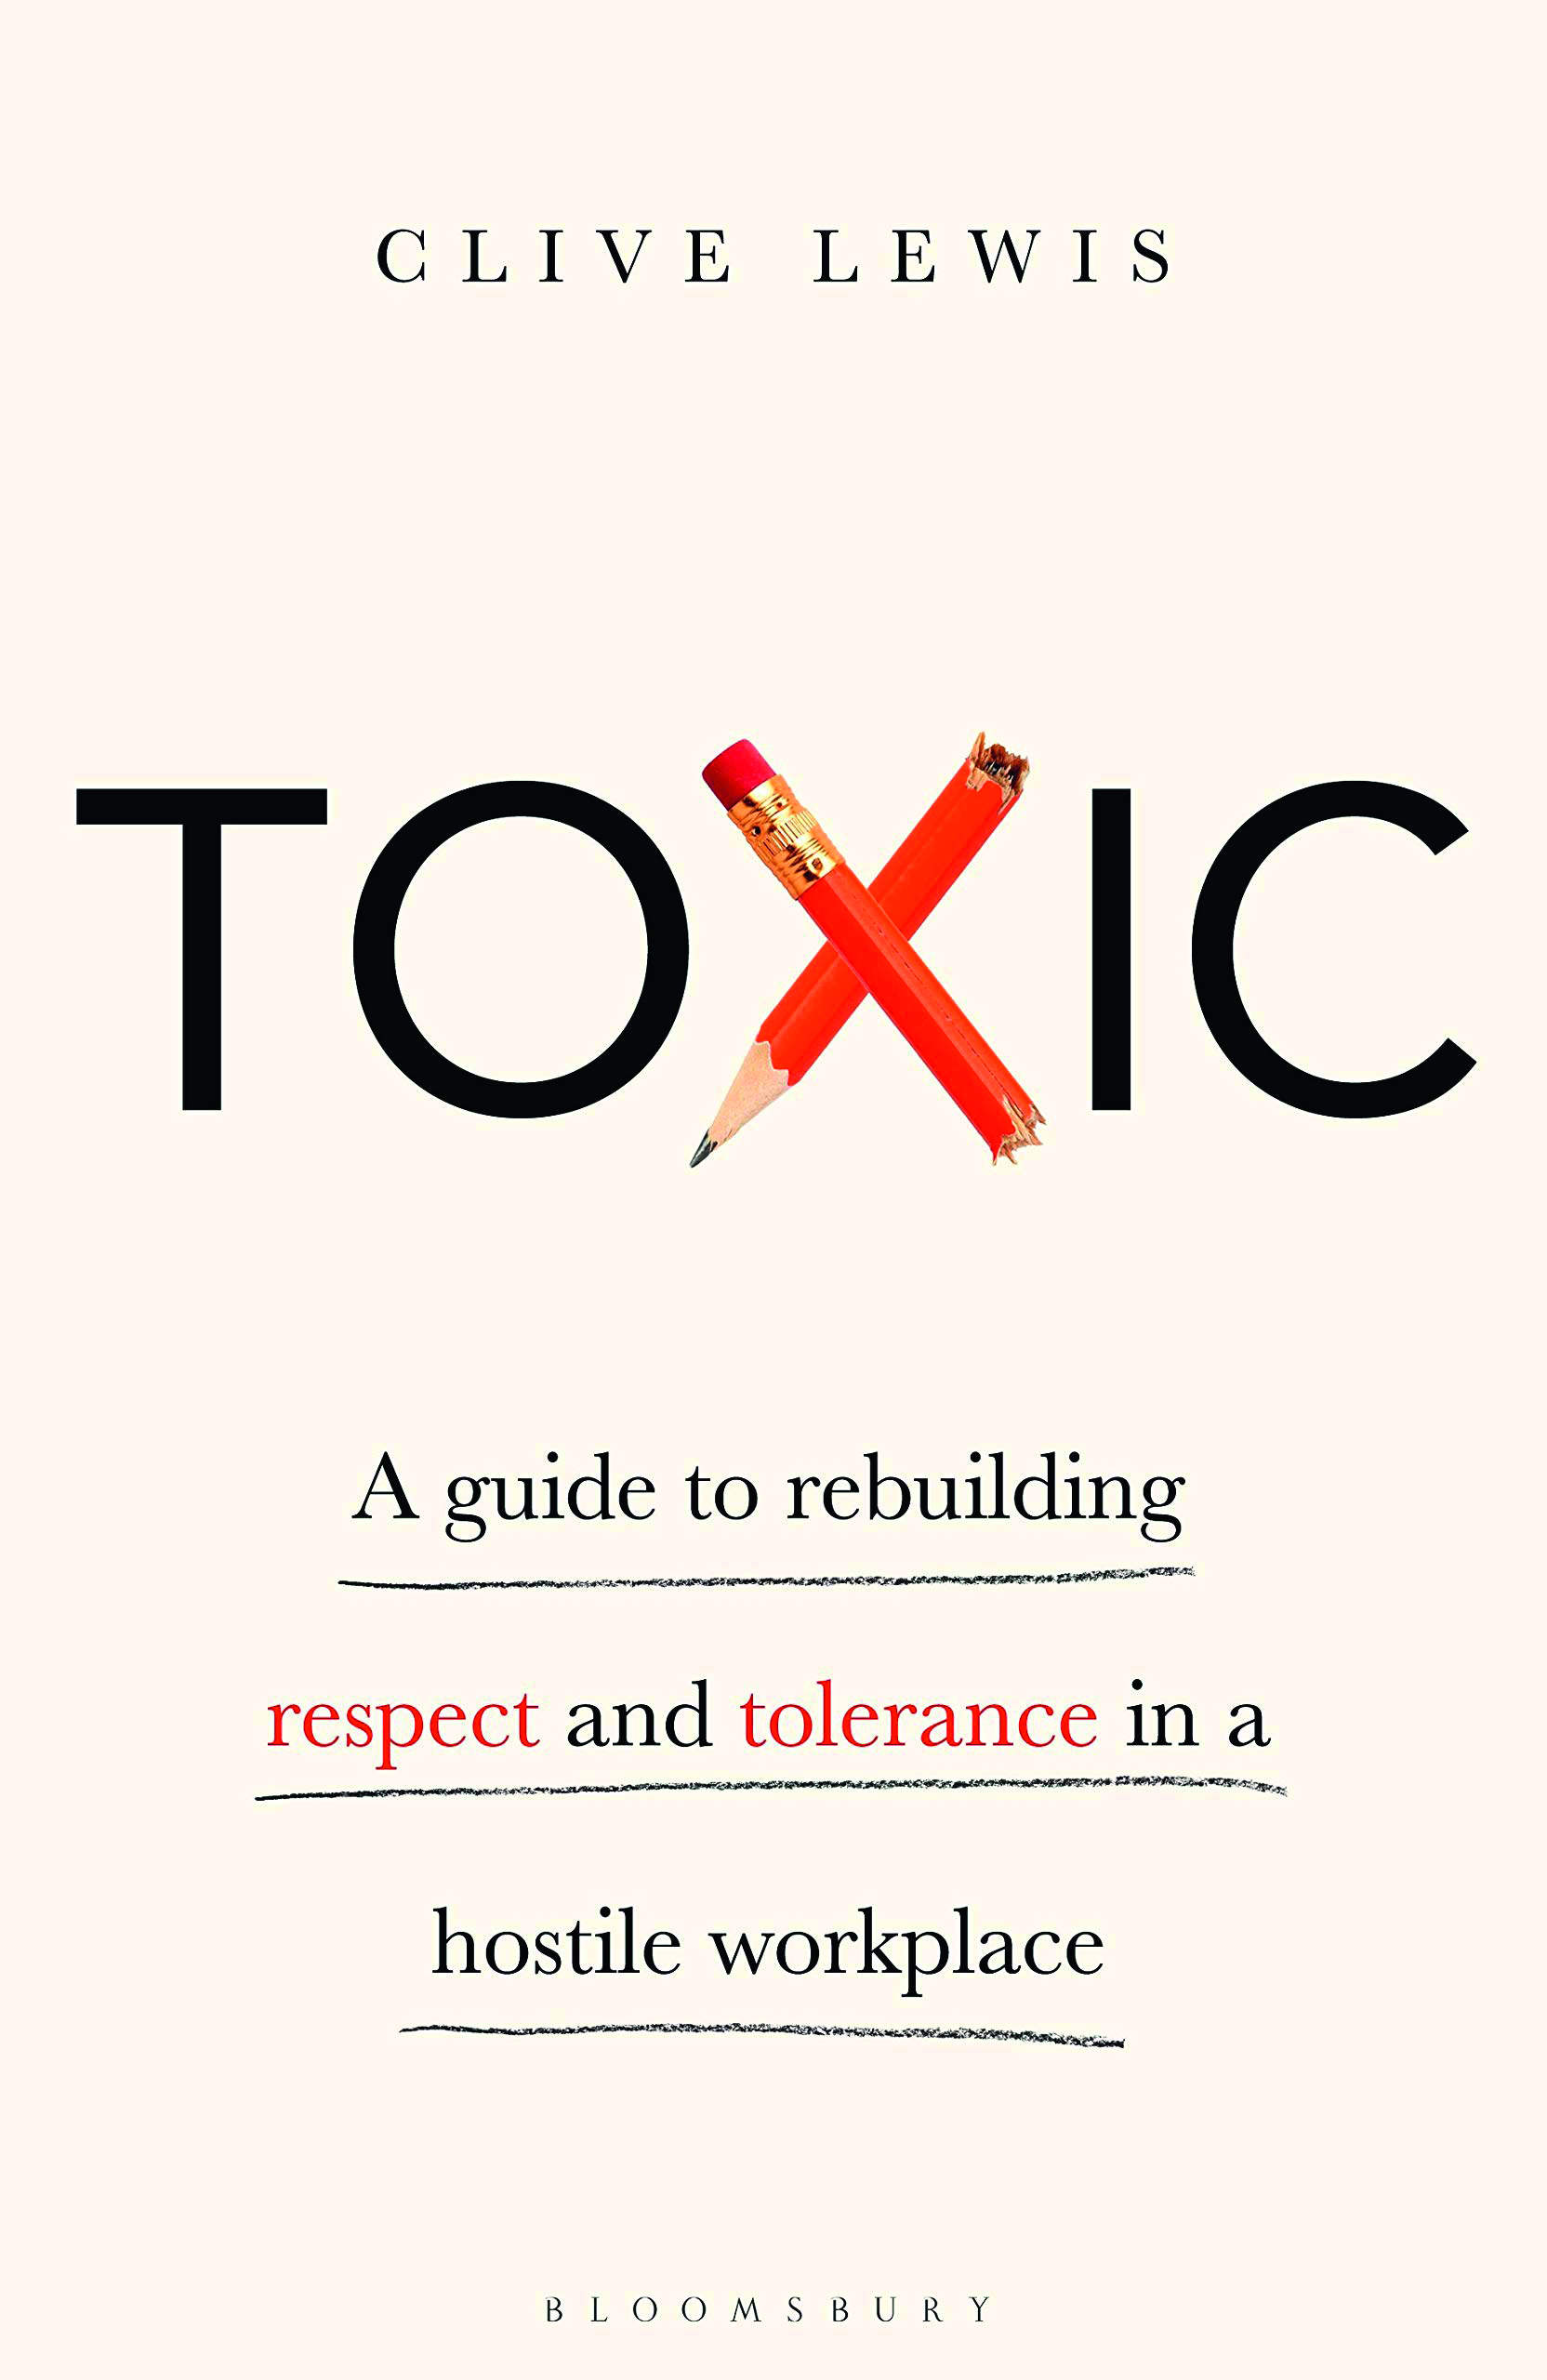 Toxic- A Guide to Rebuilding Respect and Tolerance in a Hostile Workplace, by Clive Lewis